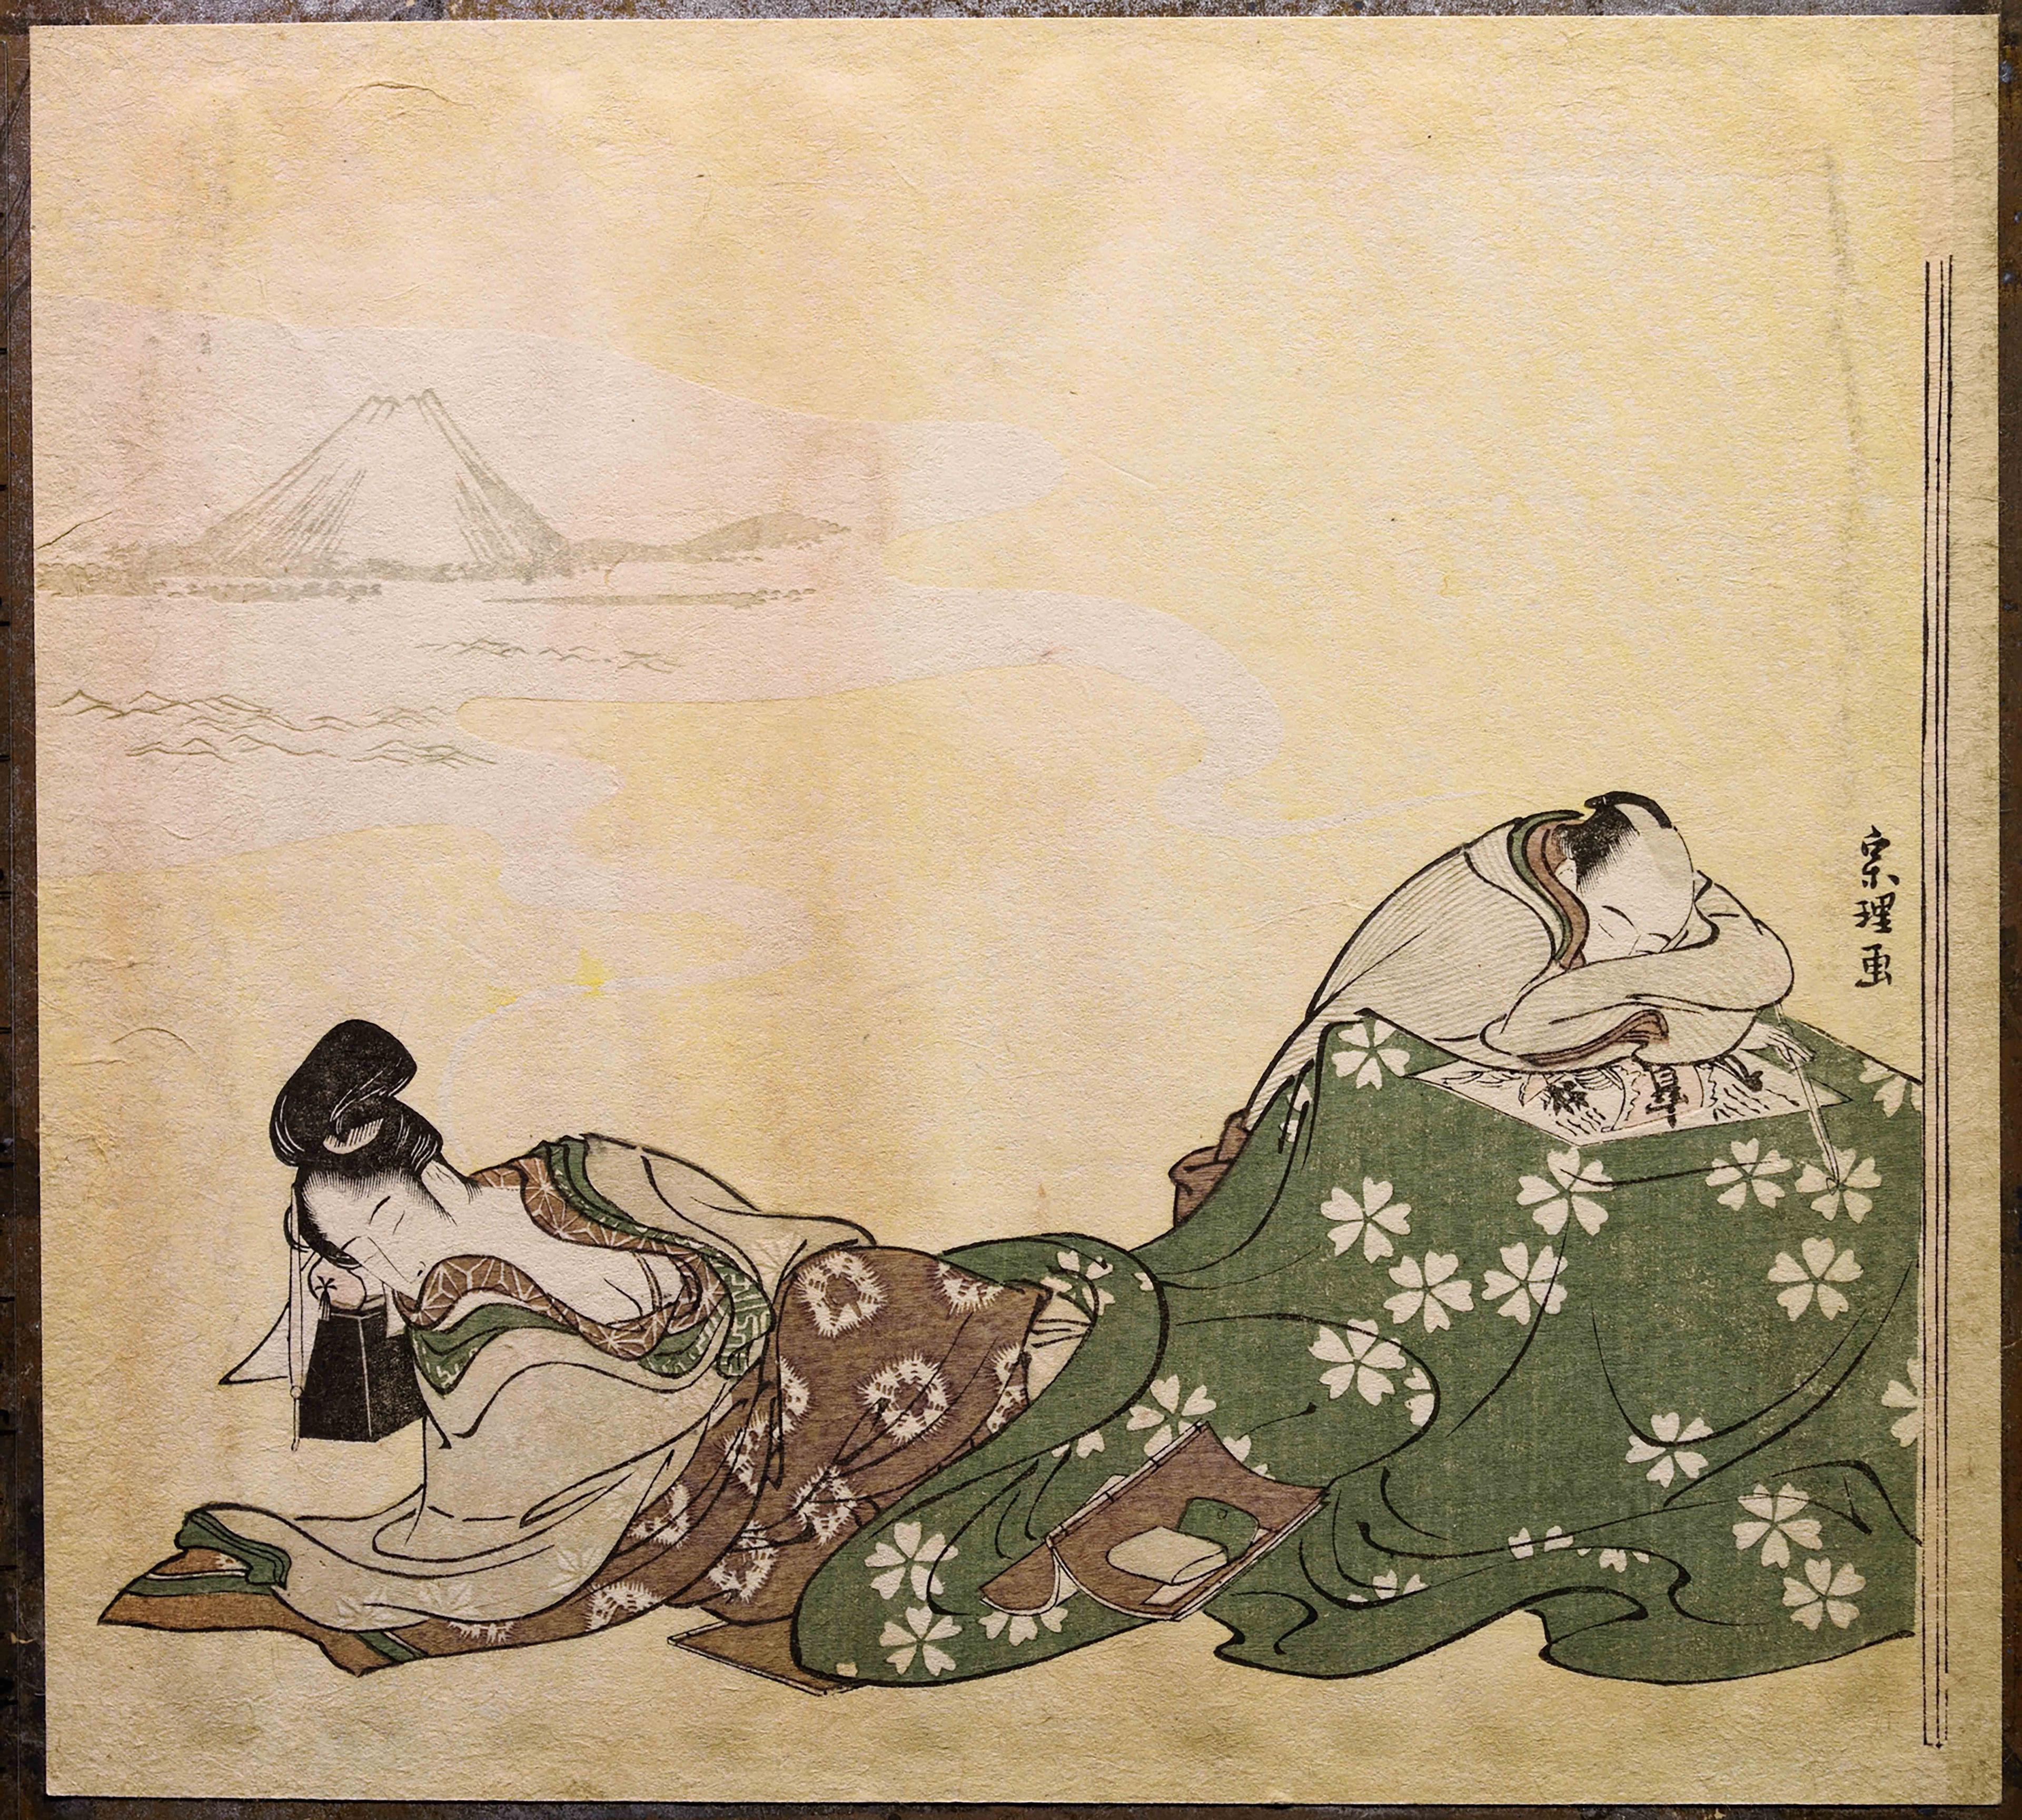 An illustration of two figures asleep on the ground, next to a small table. They're both draped in printed fabrics. Mount Fuji is faintly visible in the distance.